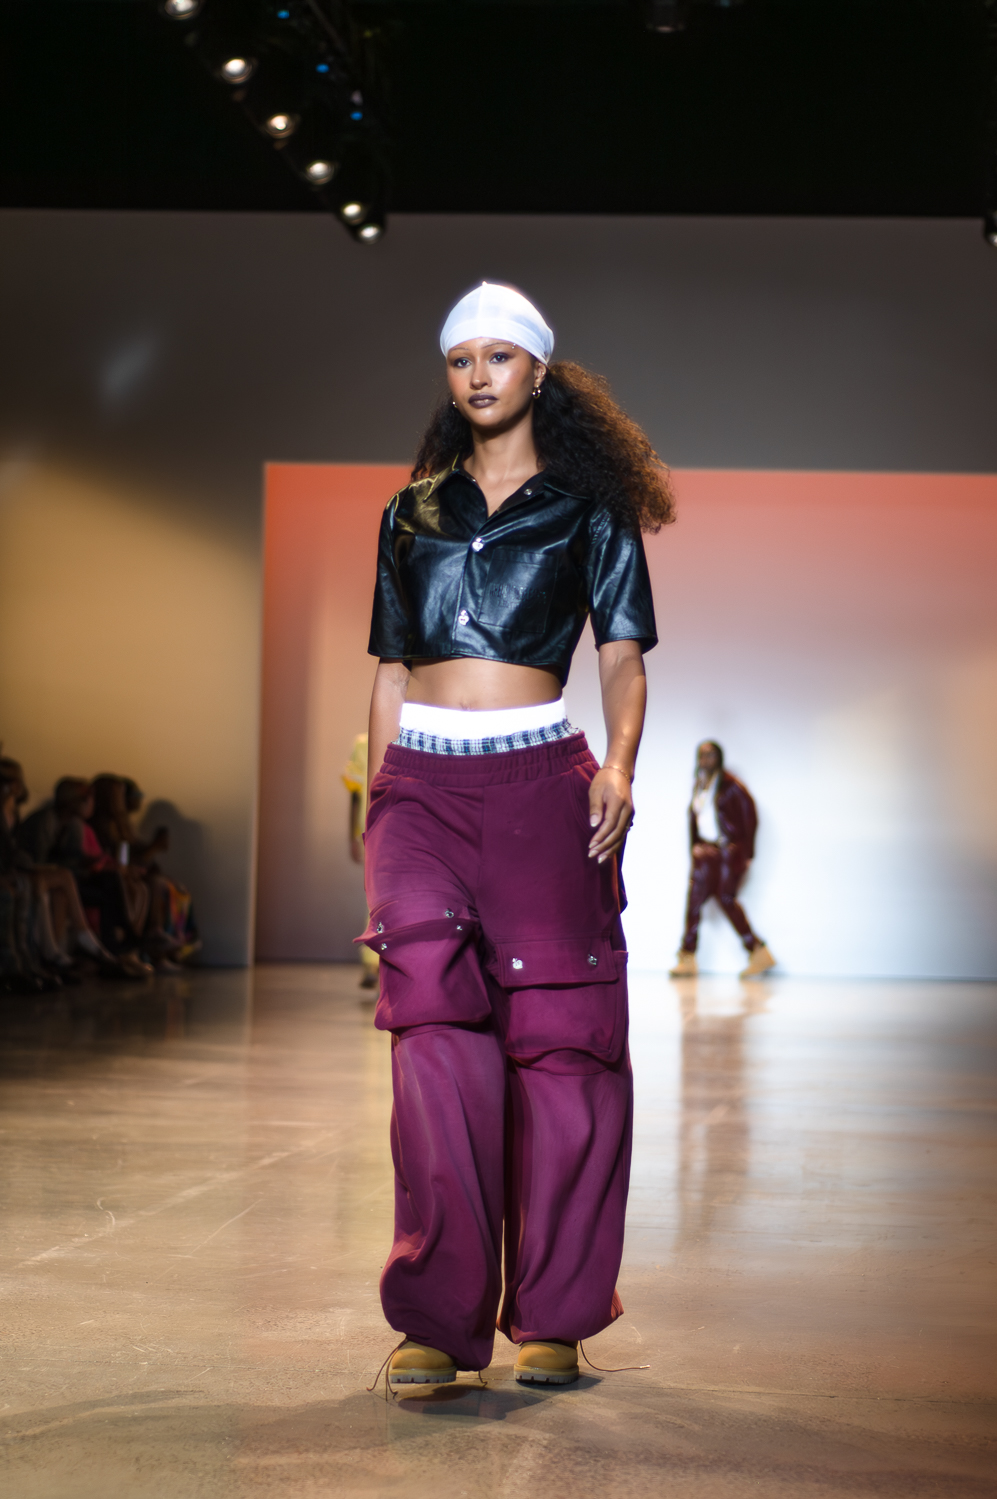 A model wearing a black, seemingly leather, crop top, closed in the front by two buttons, walks on a runway. The model wears a white beanie and baggy, purple pans with big pockets on both legs. The model’s boxers are slightly visible above the pants. The model wears small, gold-colored hoop earrings, and brown lace-up boots.